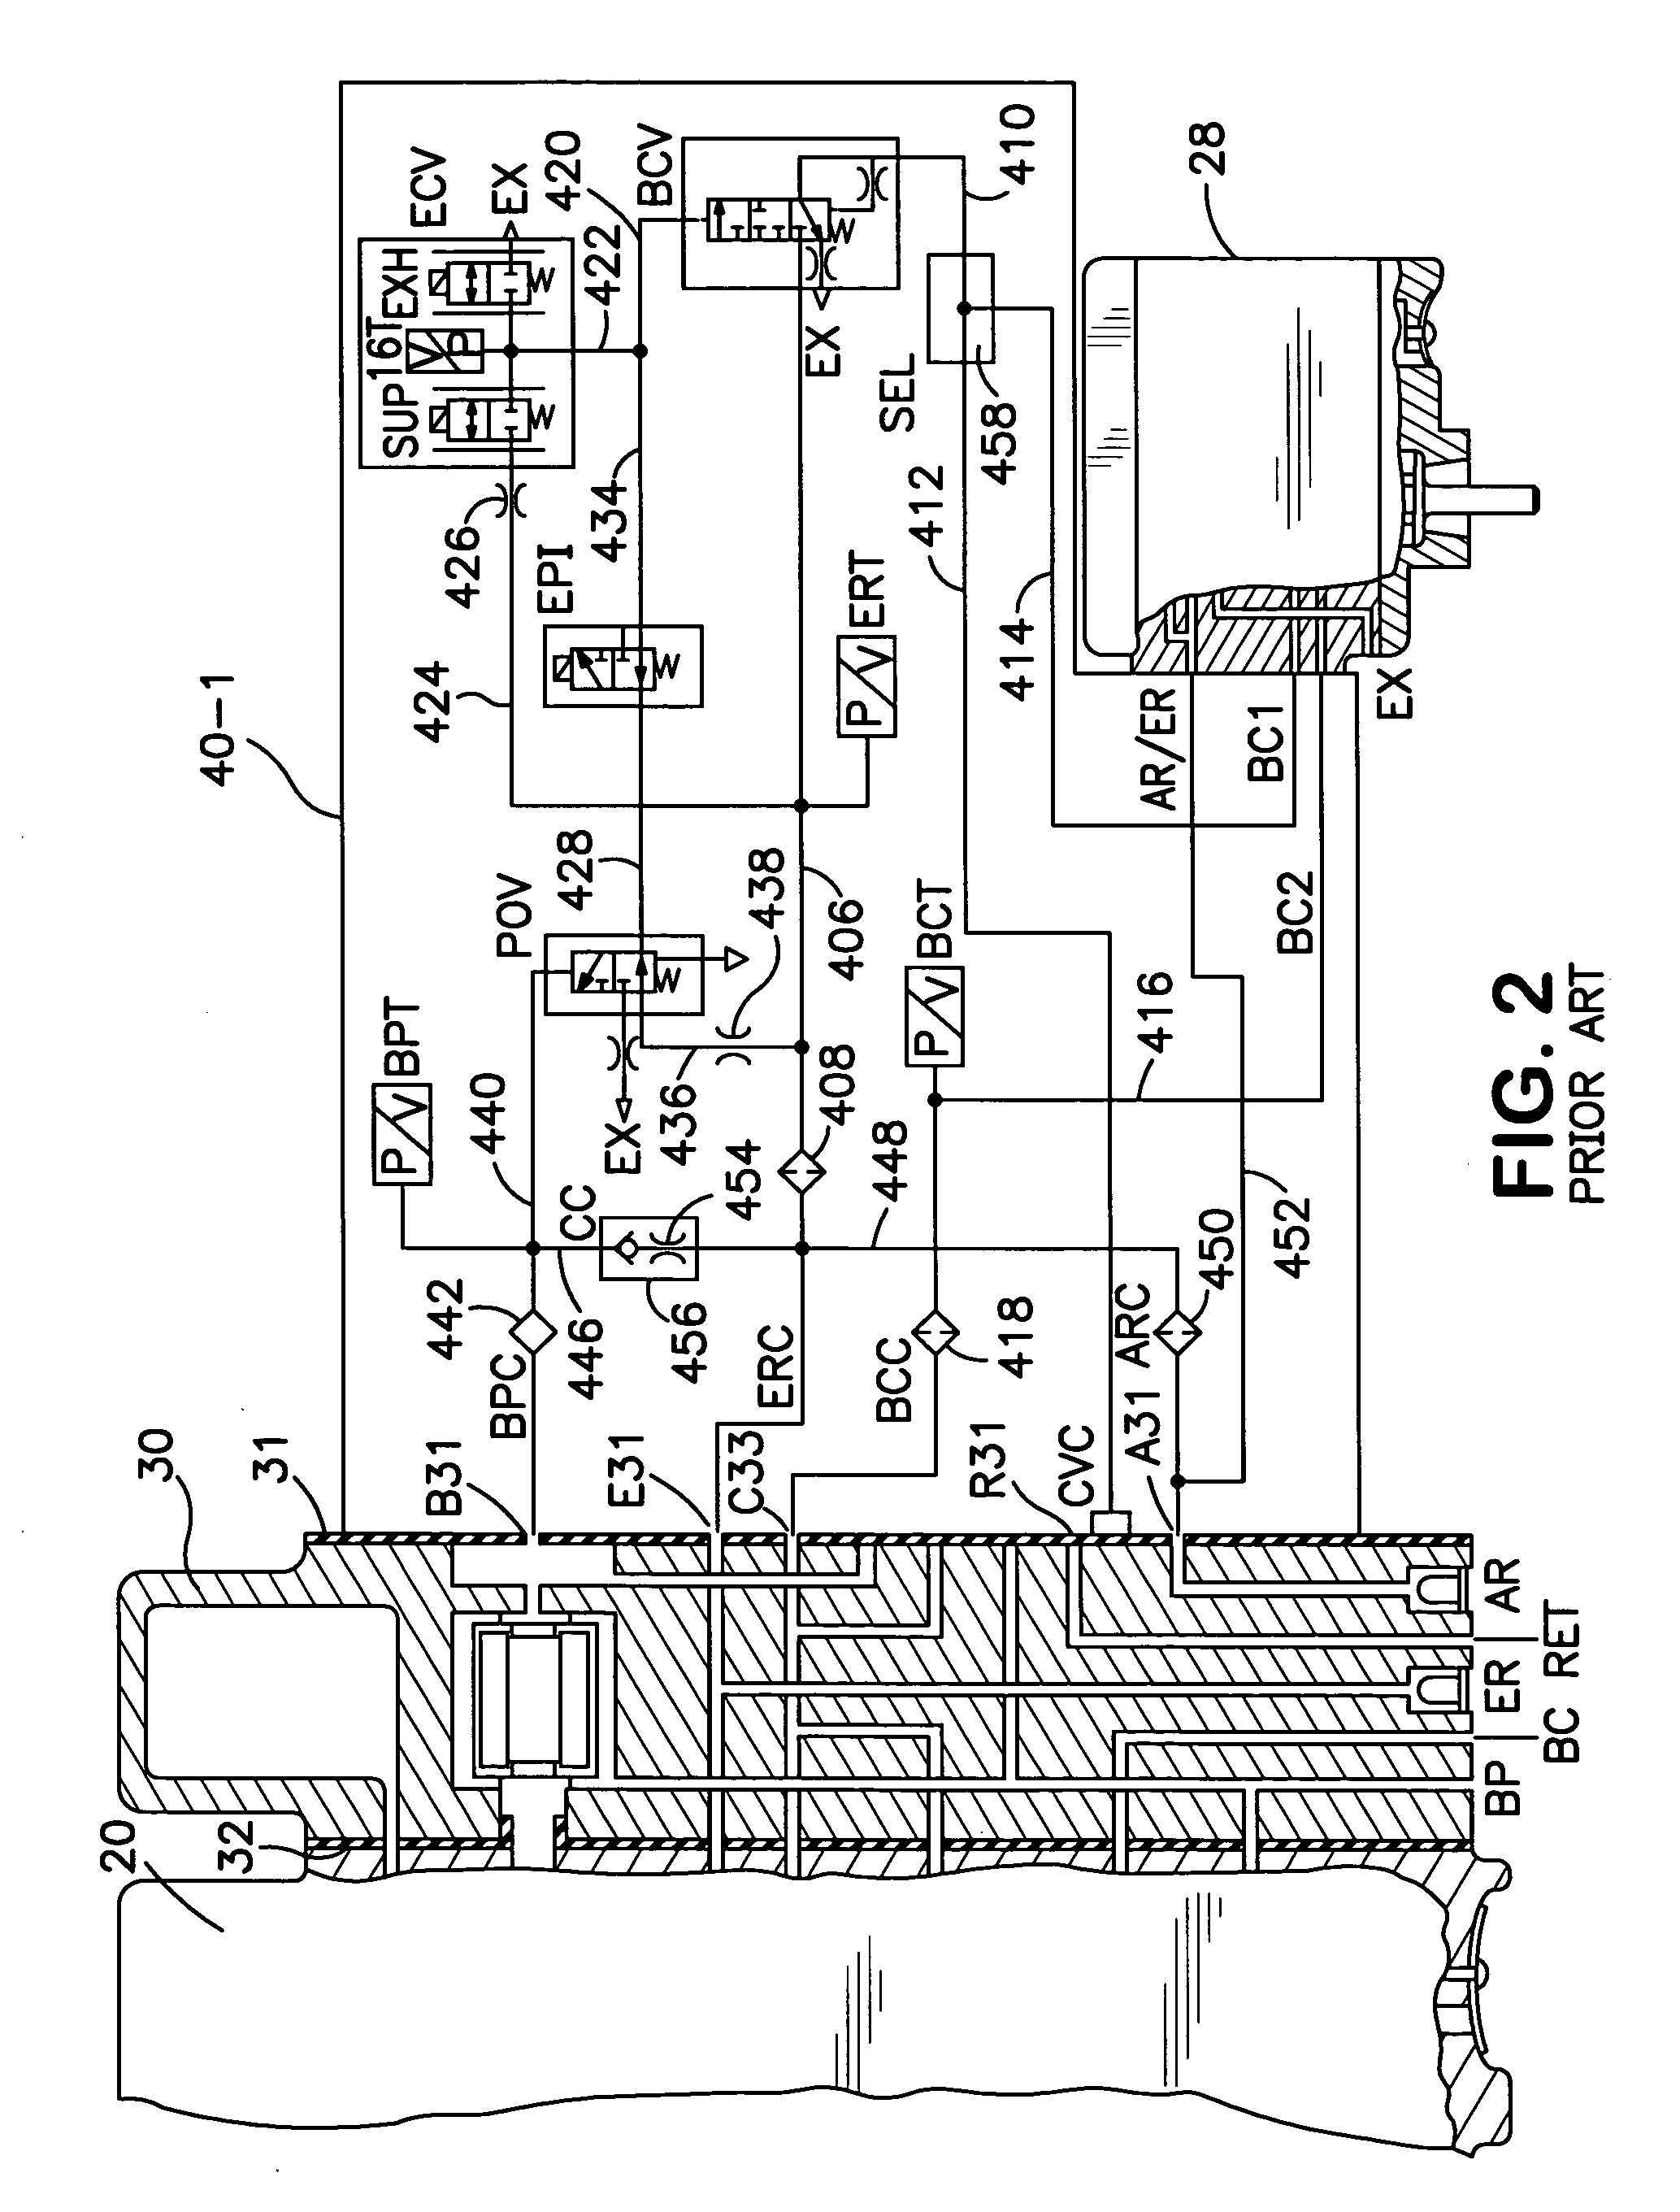 Relay configuration for an electro-pneumatic train